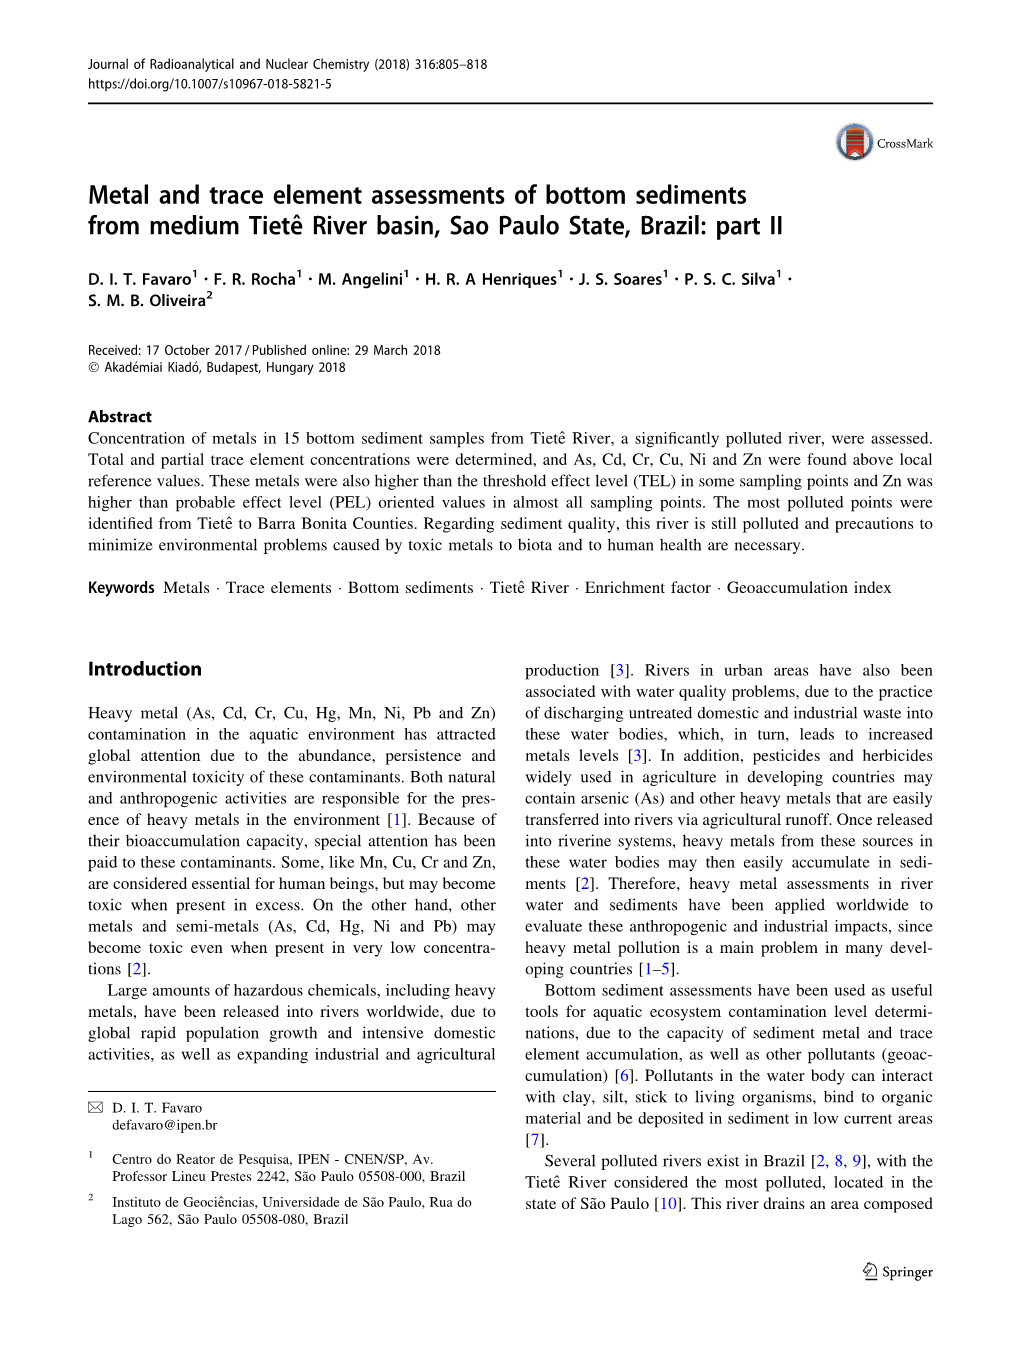 Metal and Trace Element Assessments of Bottom Sediments from Medium Tieteˆ River Basin, Sao Paulo State, Brazil: Part II